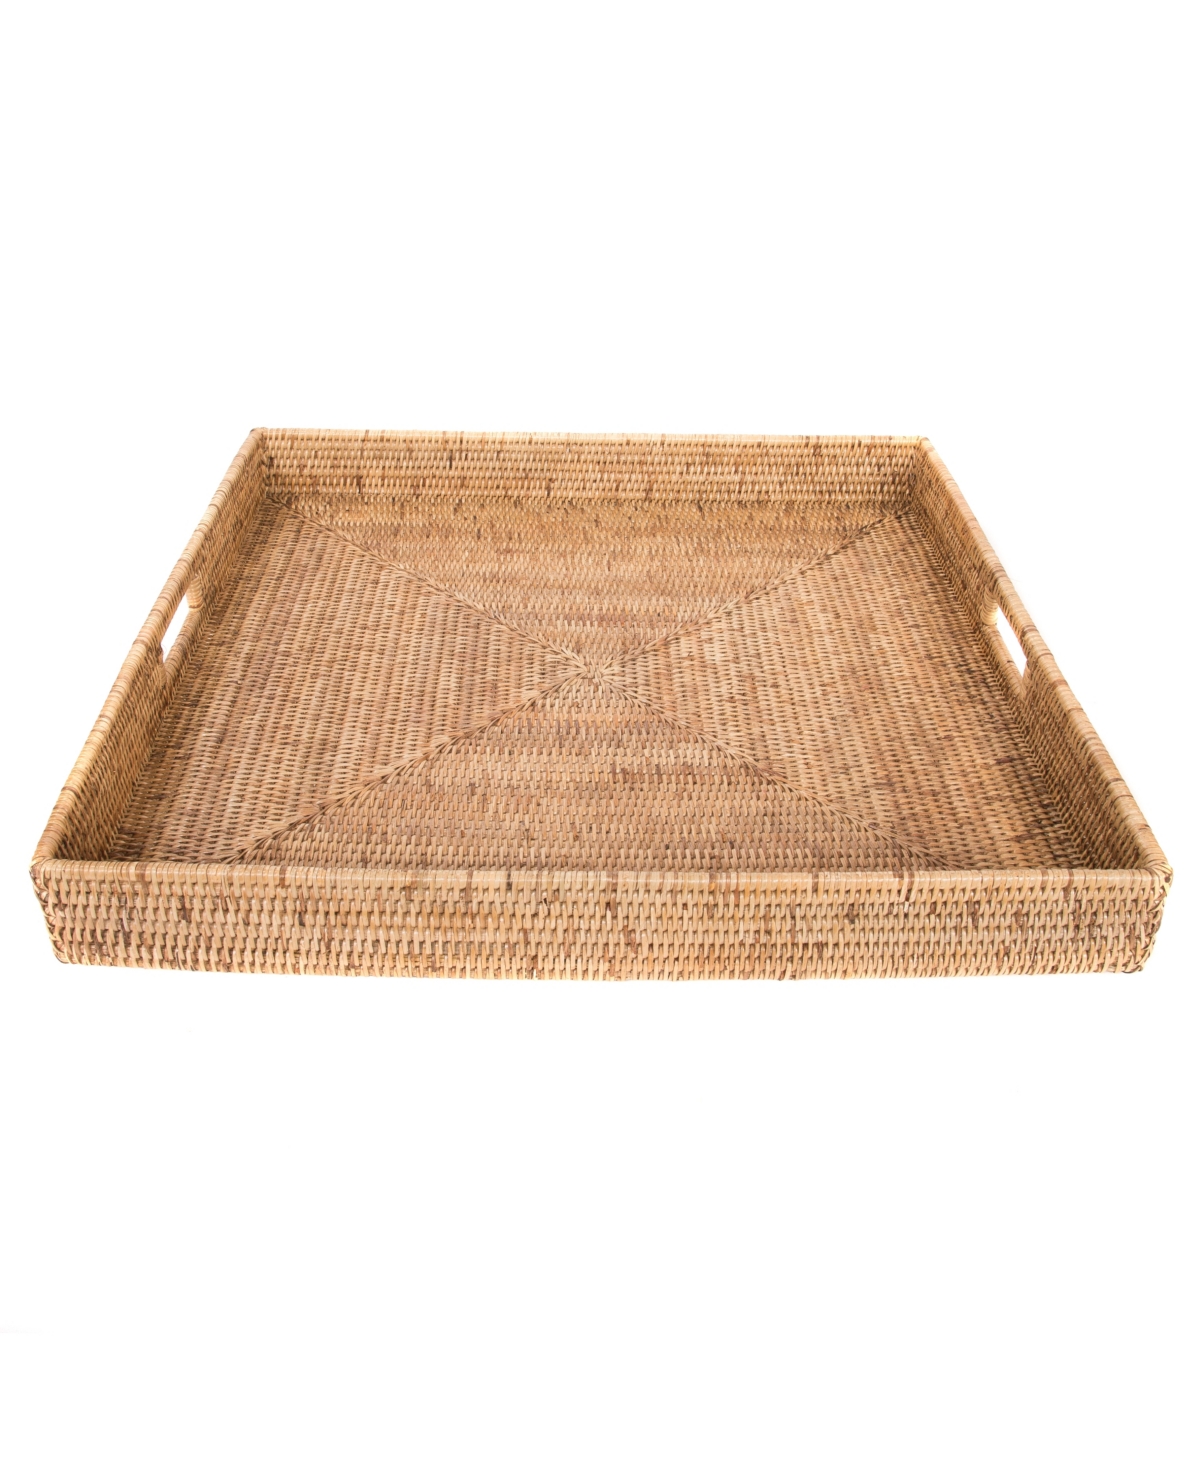 Artifacts Trading Company Artifacts Rattan Square Ottoman Tray In Honey Brown